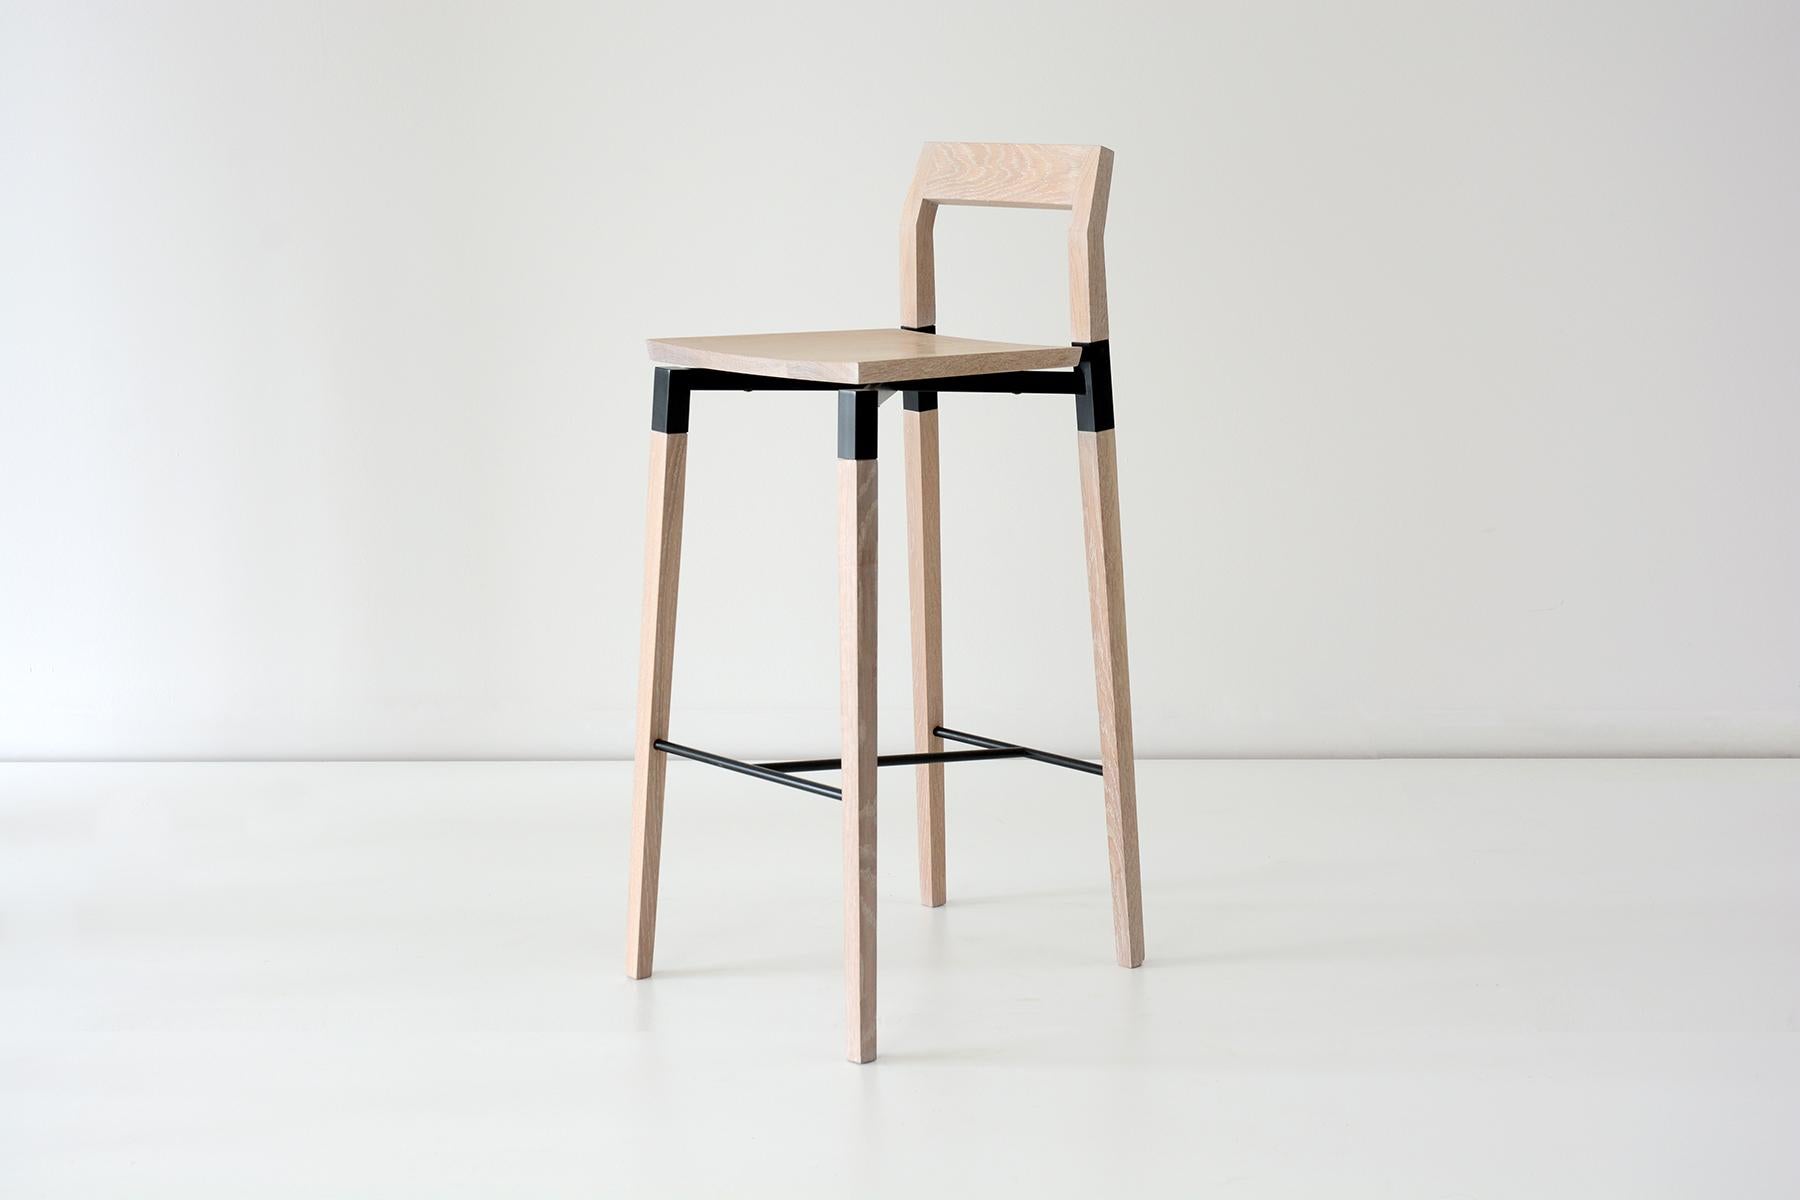 Metal plated oak parkdale counter stool by Hollis & Morris
Dimensions: 16.5